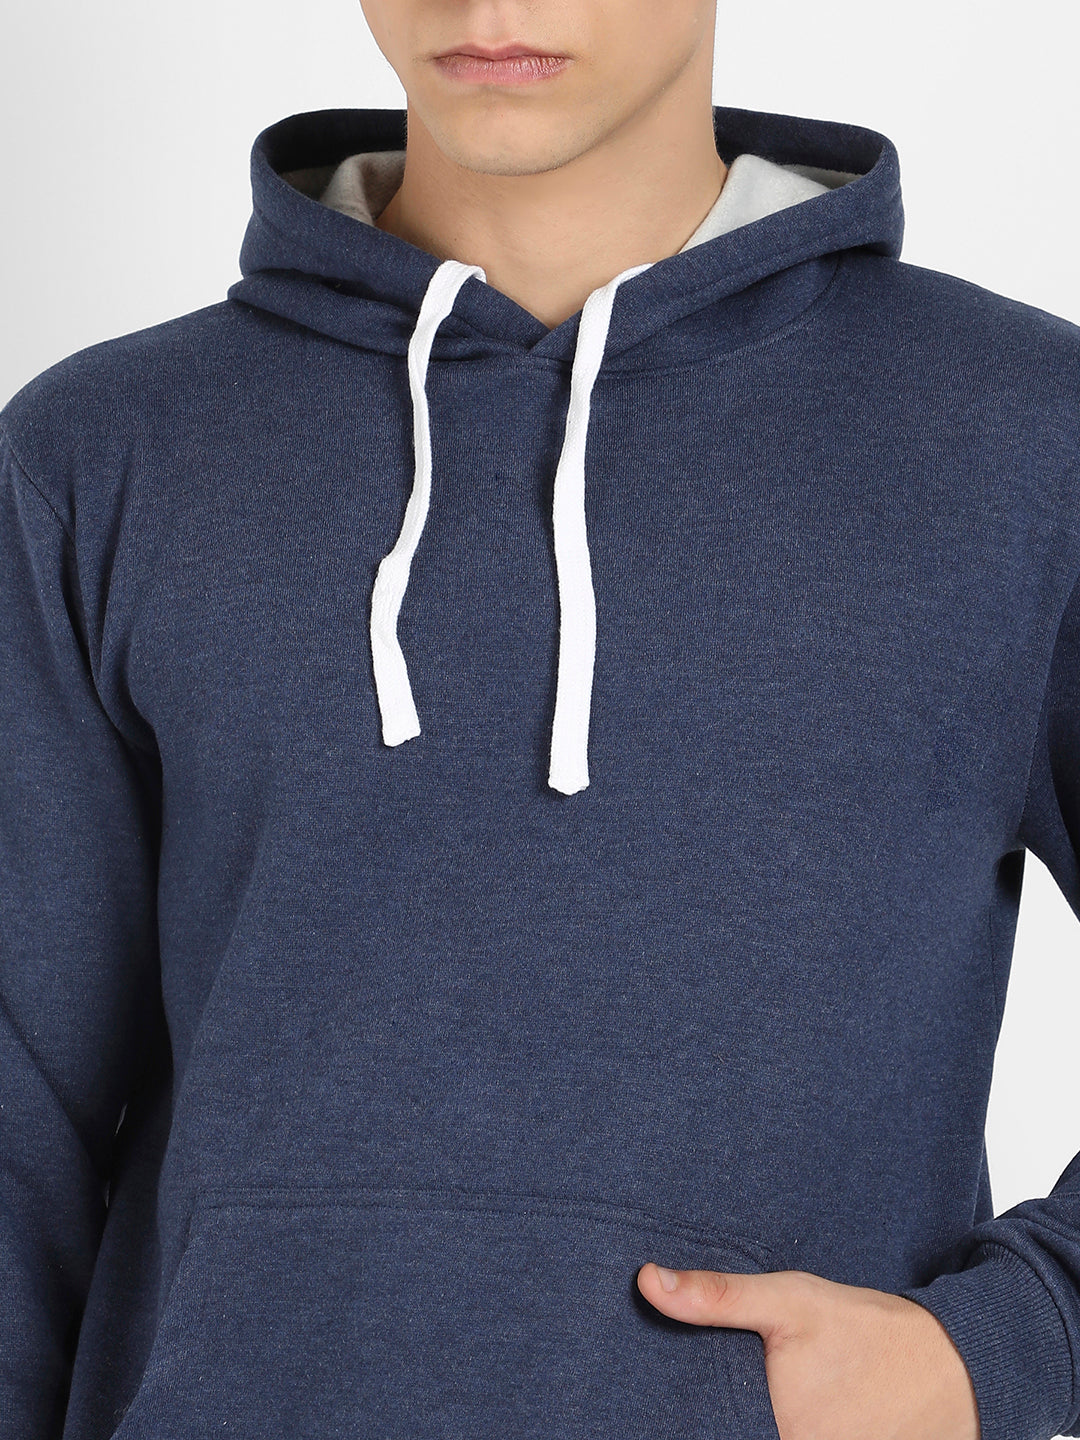 Men's Dark Blue Pullover Hoodie With Contrast Drawstring